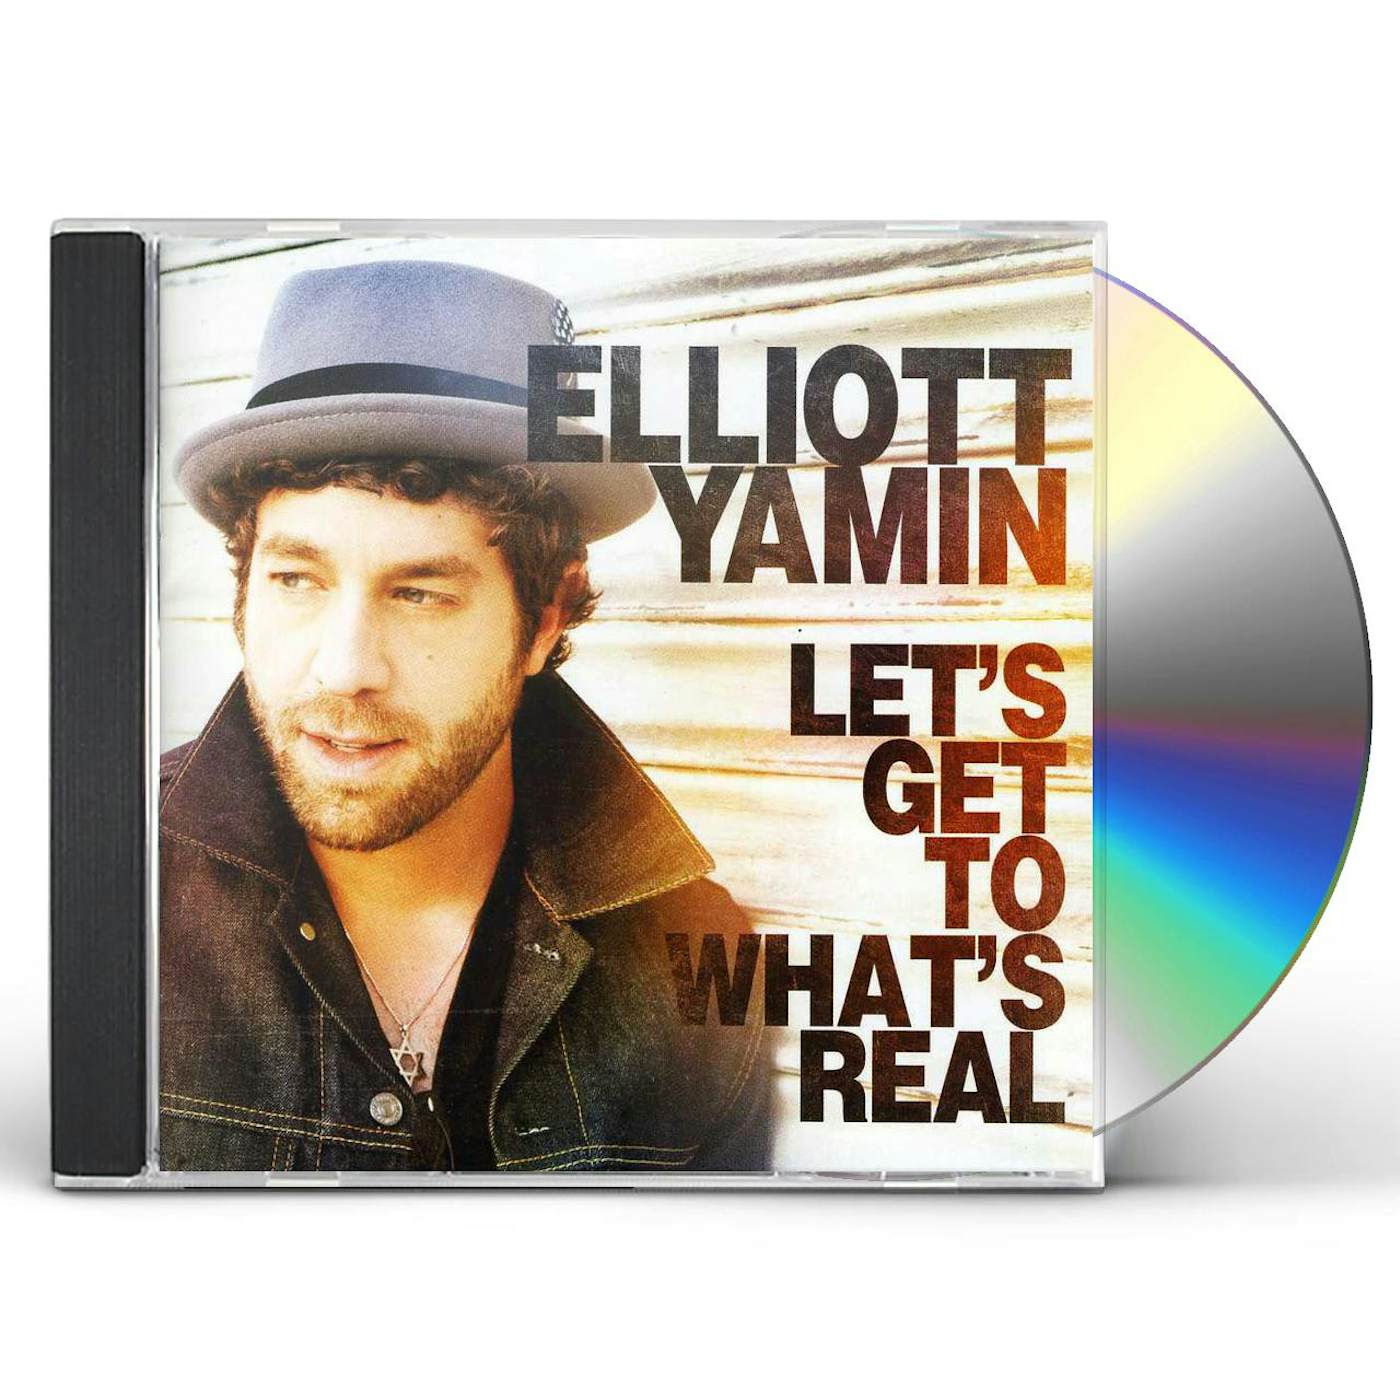 Elliott Yamin LET'S GET TO WHAT'S REAL CD